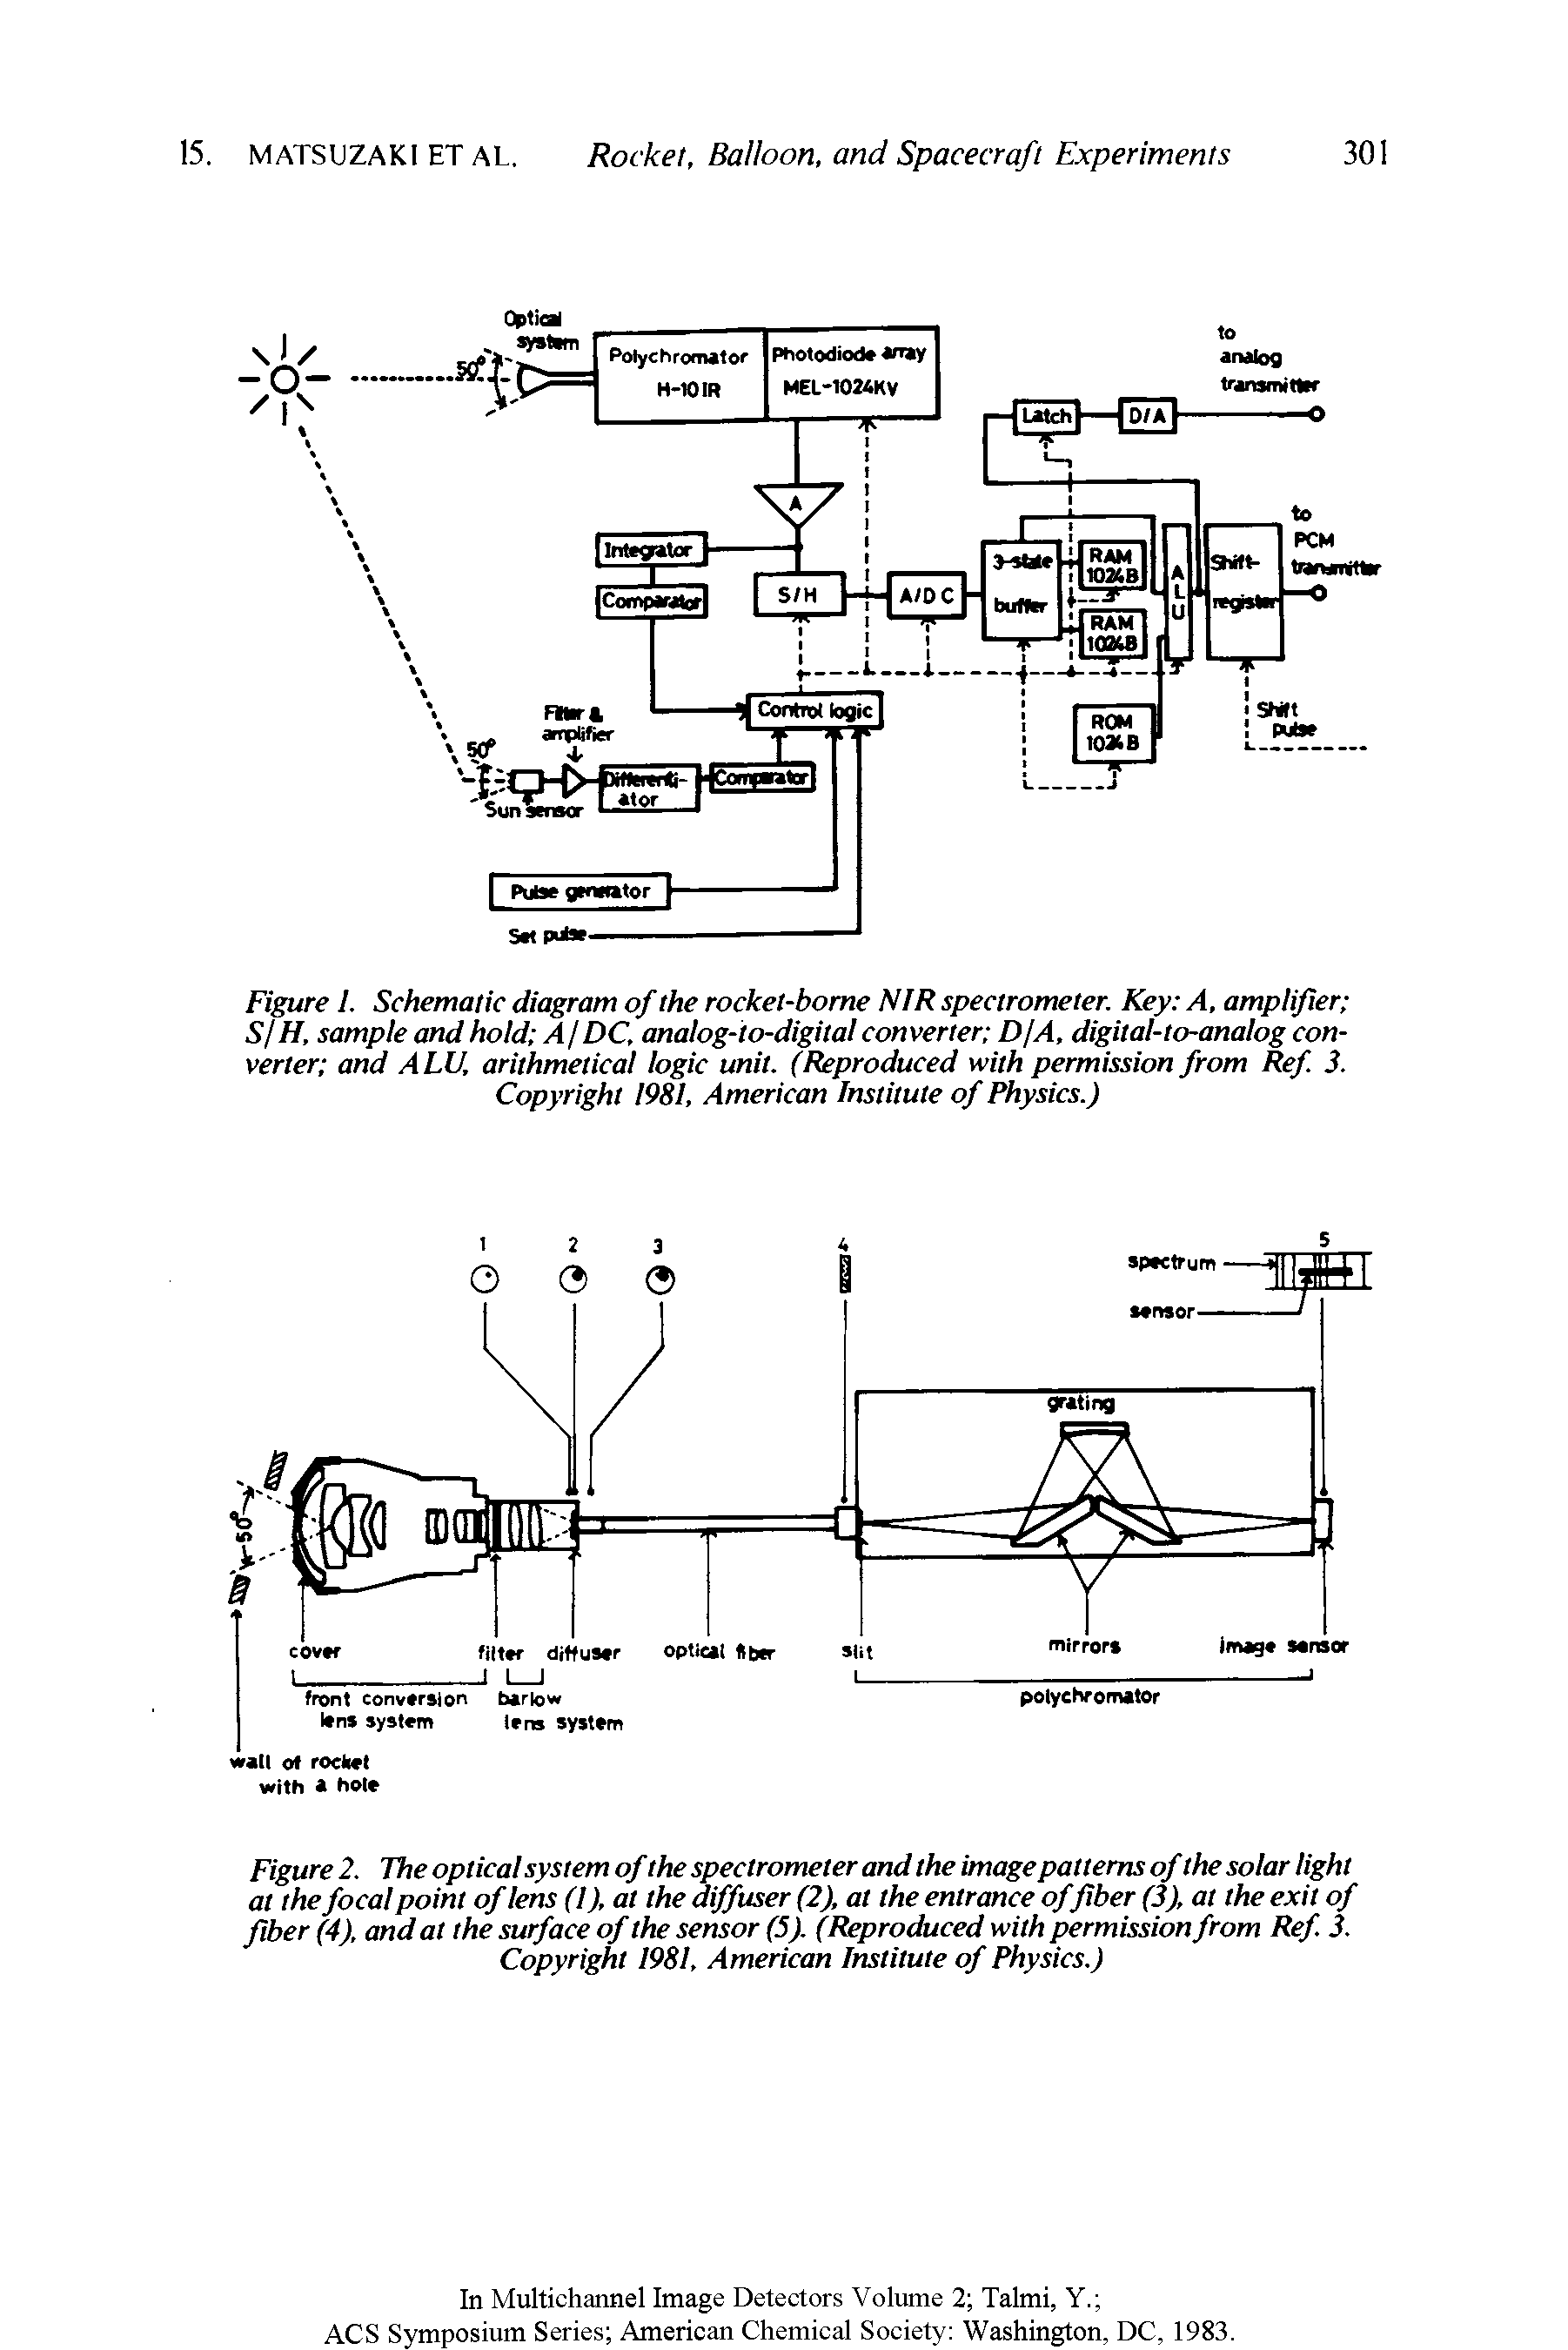 Figure 1. Schematic diagram of the rocket-borne NfR spectrometer. Key A, amplifier S/H, sample and hold A/DC, analog-to-digital converter D/A, digital-to-analog converter and ALU, arithmetical logic unit. (Reproduced with permission from Ref. 3. Copyright 1981, American Institute of Physics.)...